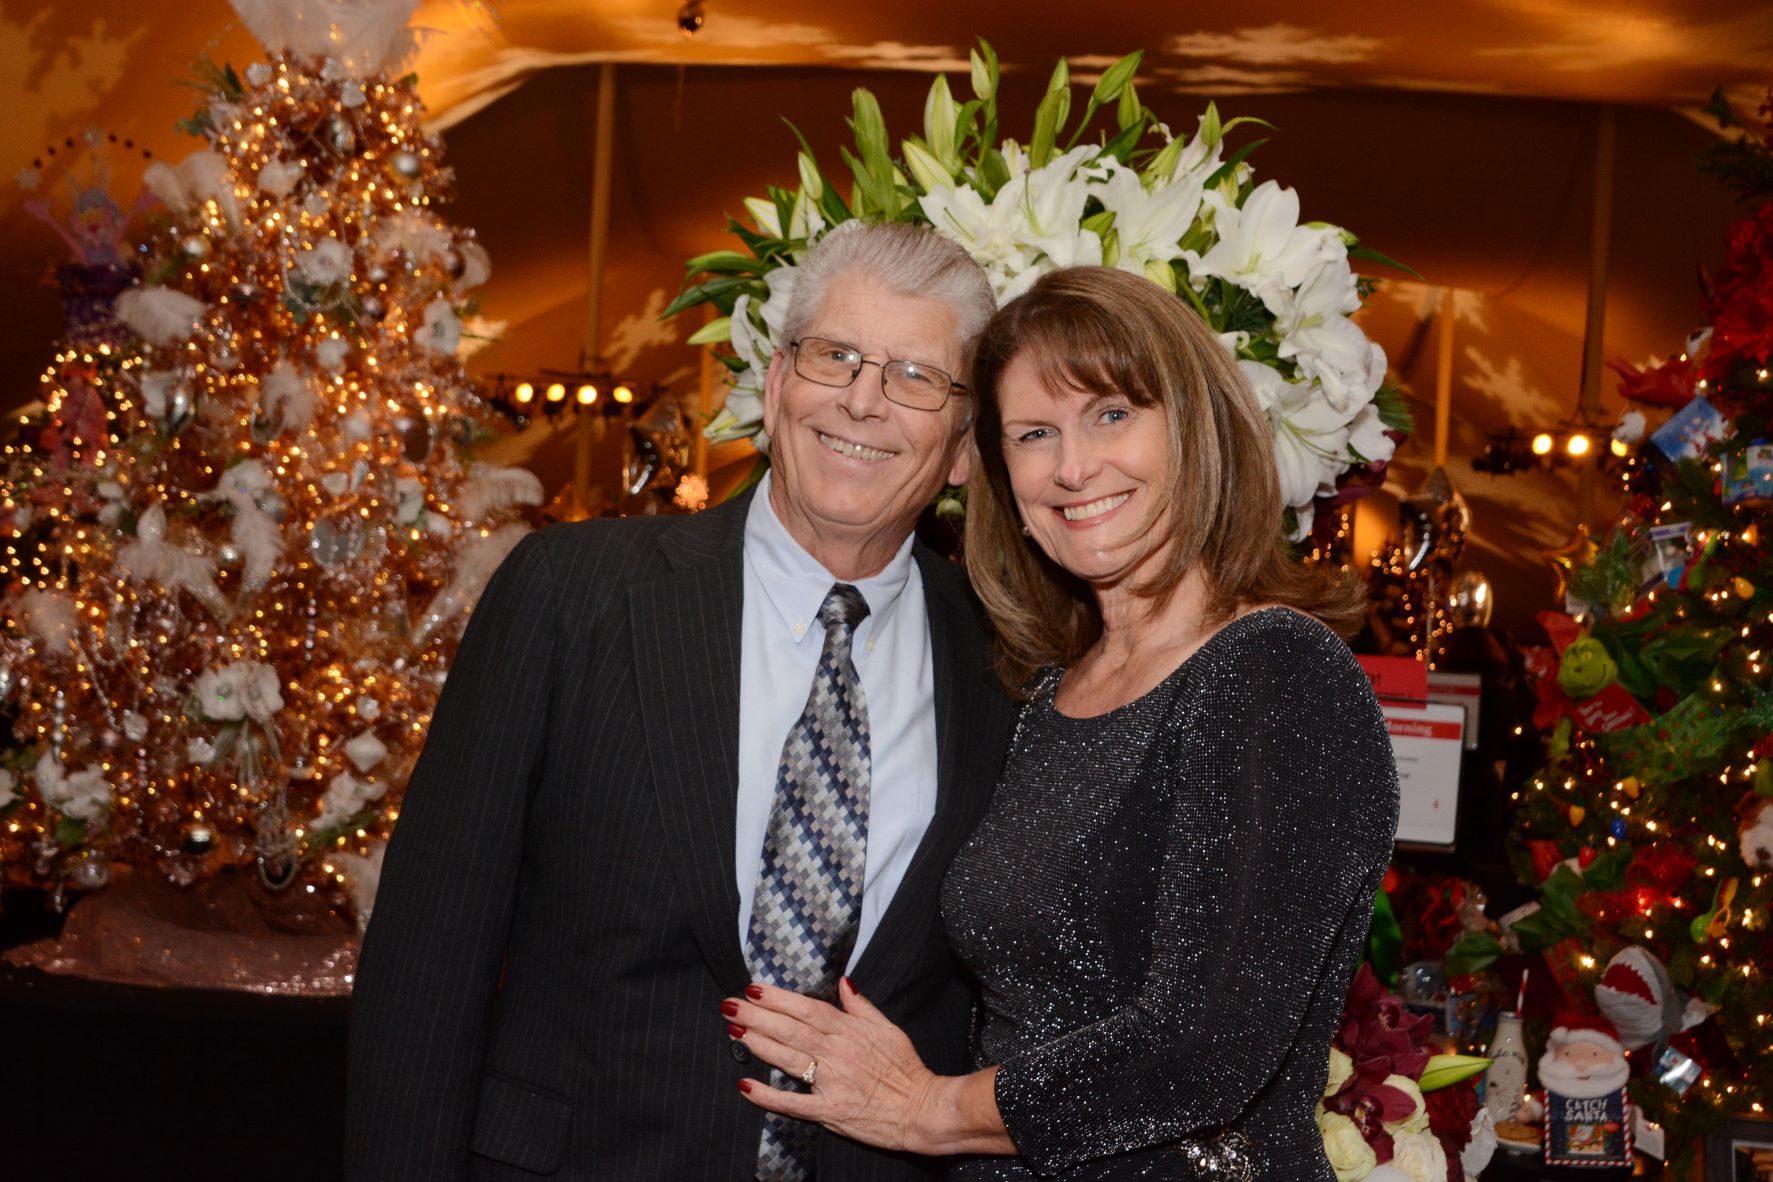 Karen and Dan Pror are grateful to Torrance Memorial and celebrate at the annual Holiday Festival Gala.